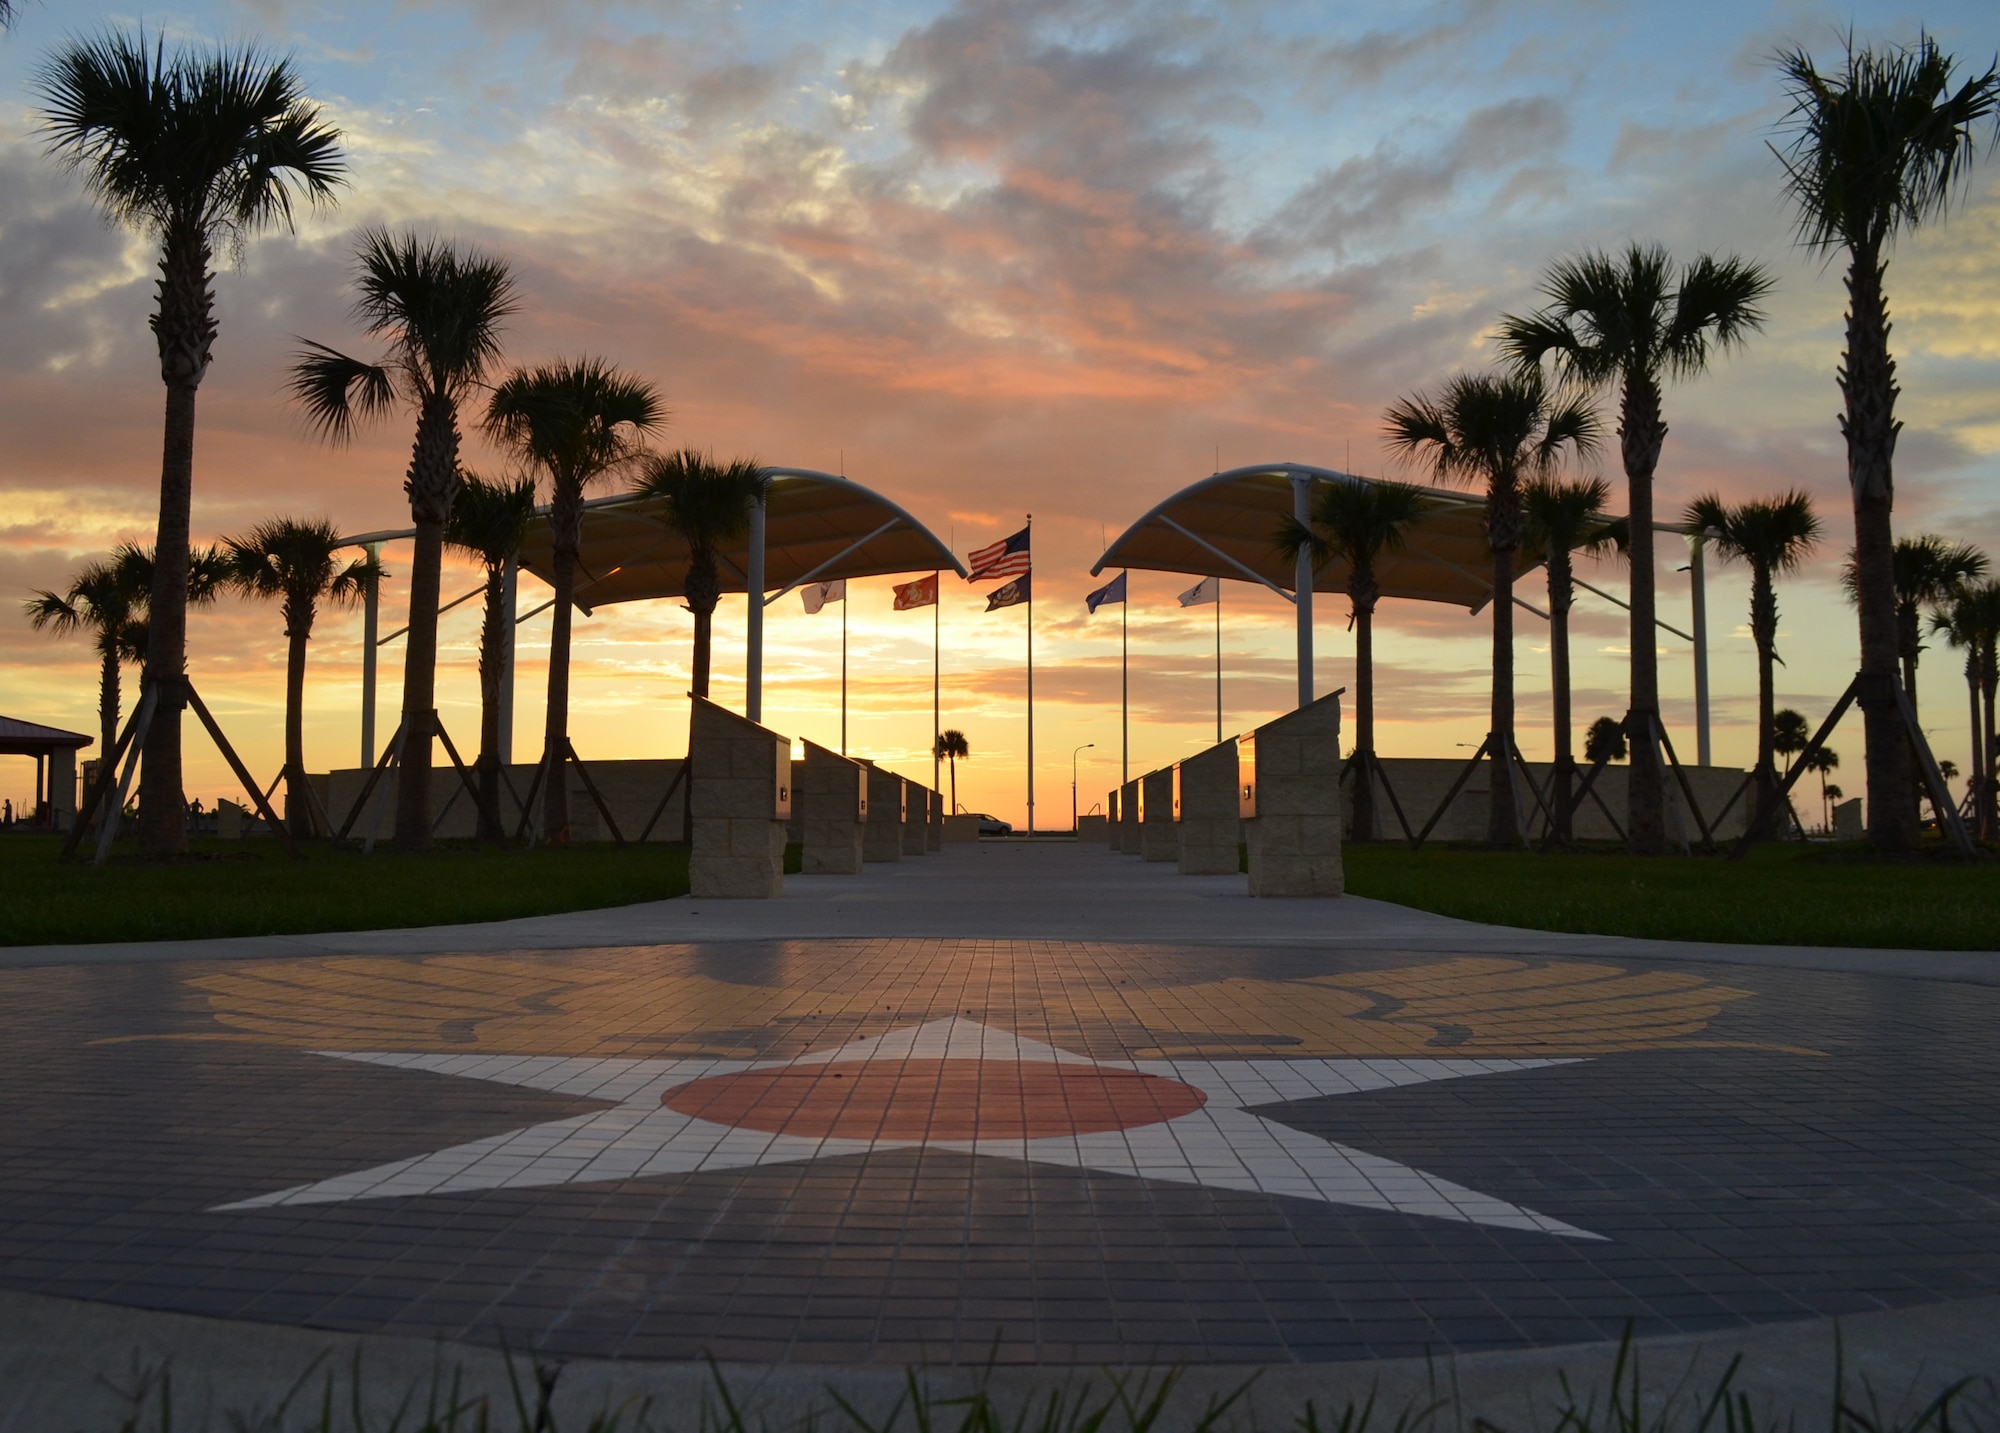 The Air Force Civil Engineer Center (AFCEC) honored MacDill Air Force Base Community Park as the 2019 Honor Award winner for landscape architecture in the Air Force Design Awards. Air Force Design Awards are given annually to recognize innovative design projects for excellence and efficiency.